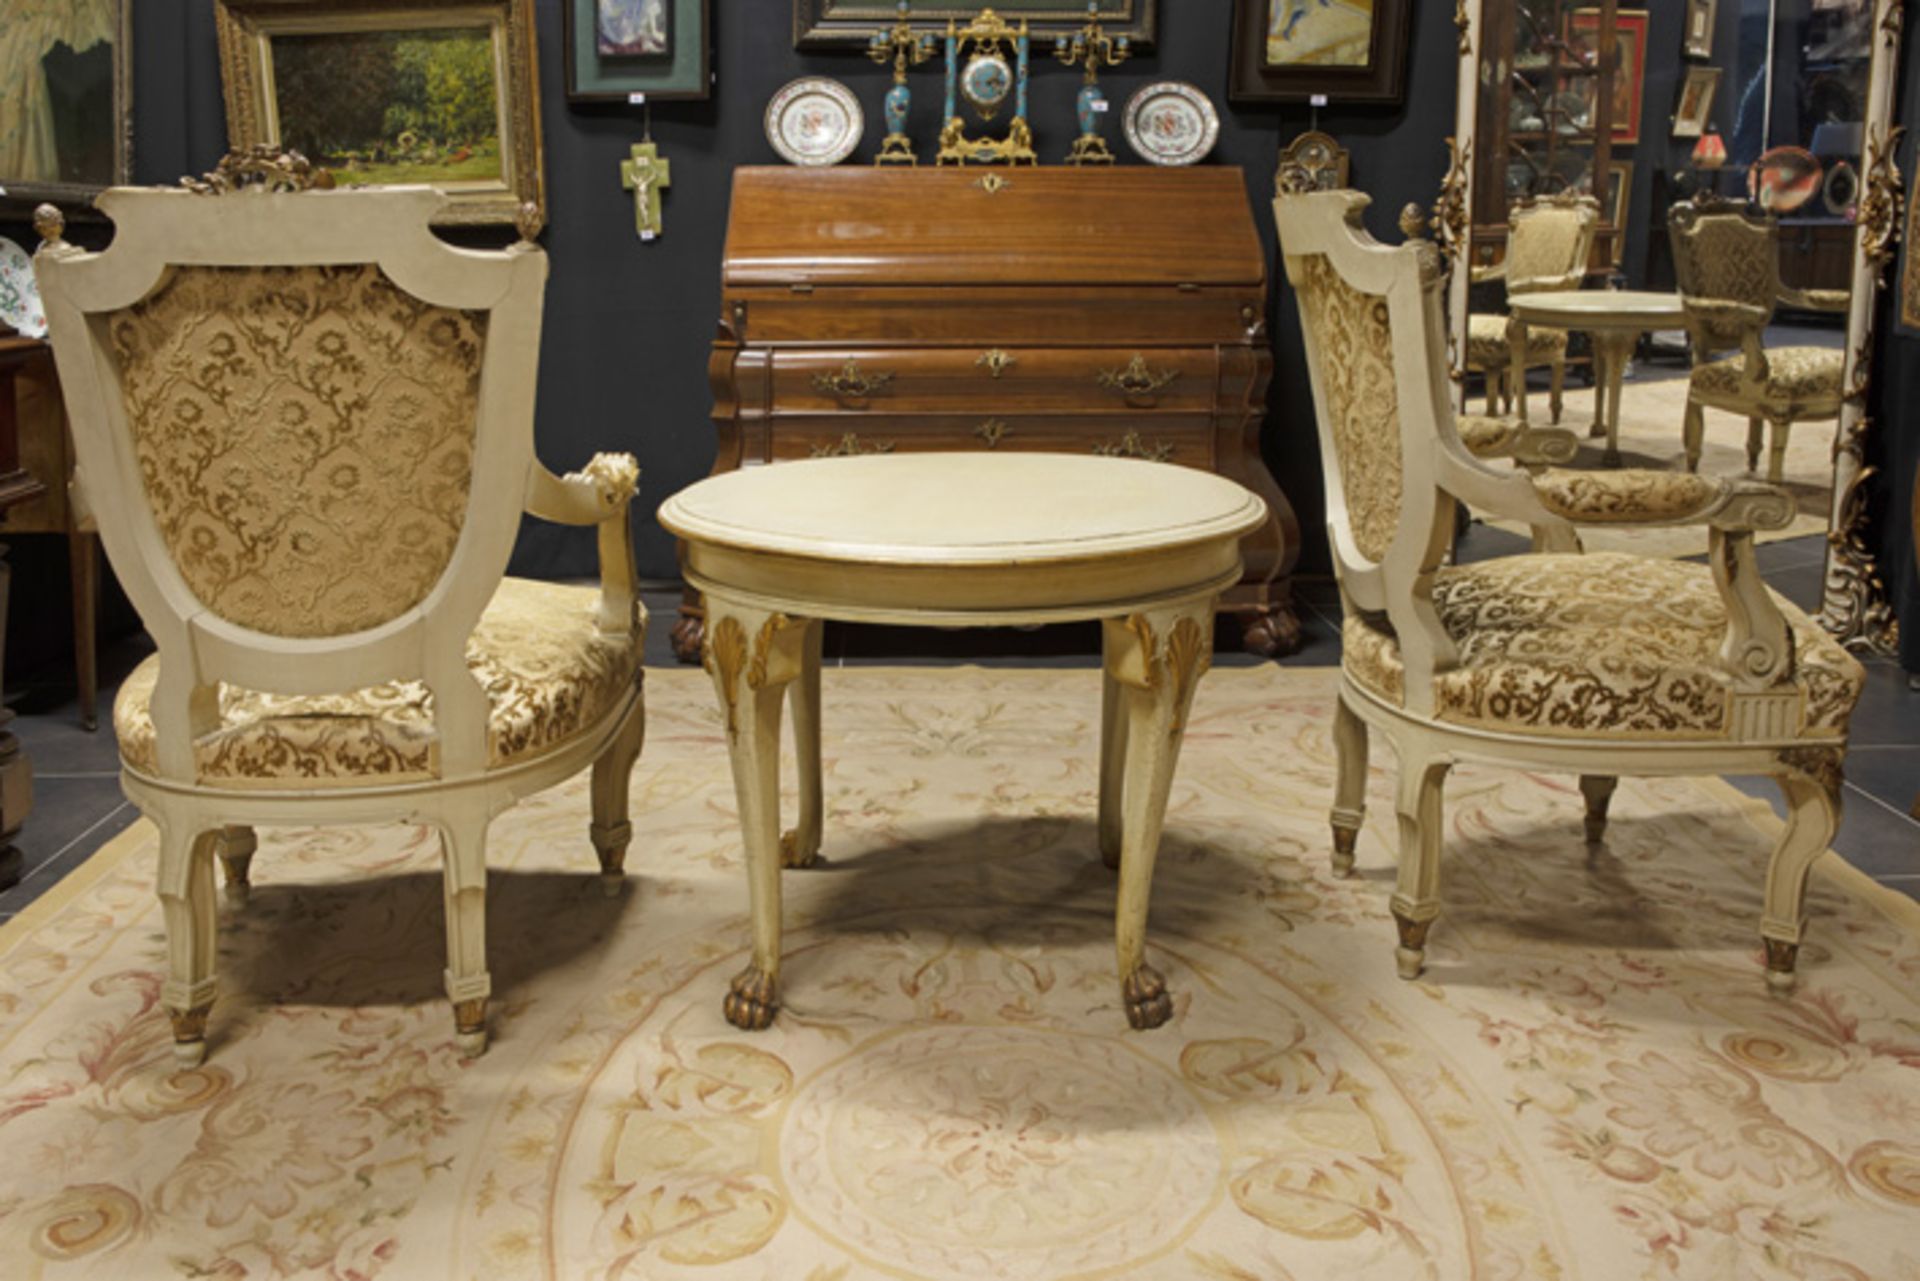 pair of 19th Cent. neoclassical Napoleon III armchairs in polychromed wood sold with a round - Image 3 of 4